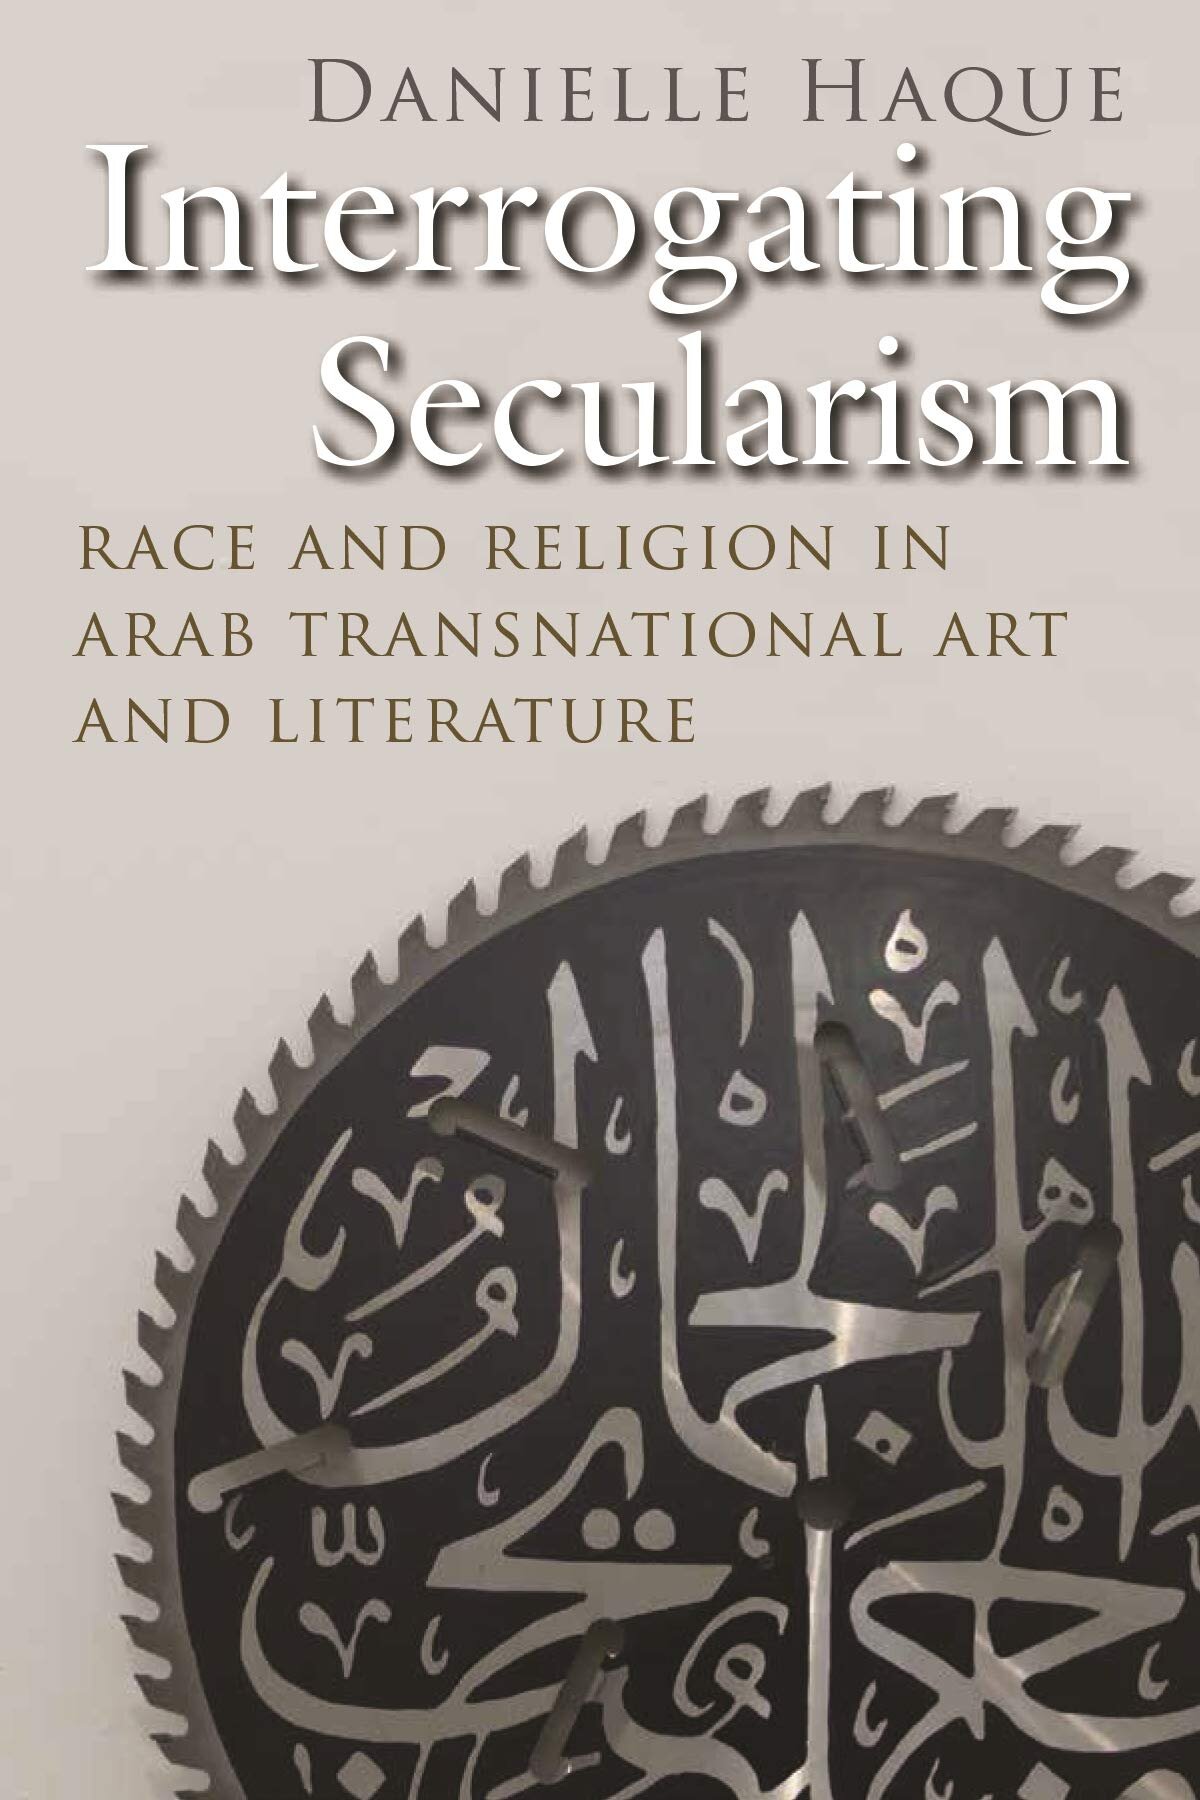 Haque's   Interrogating Secularism   frames its argument around the literary work of such writers as Khaled Mattawa, Toni Morrison, Laila Lalami and Mohja Kahf.